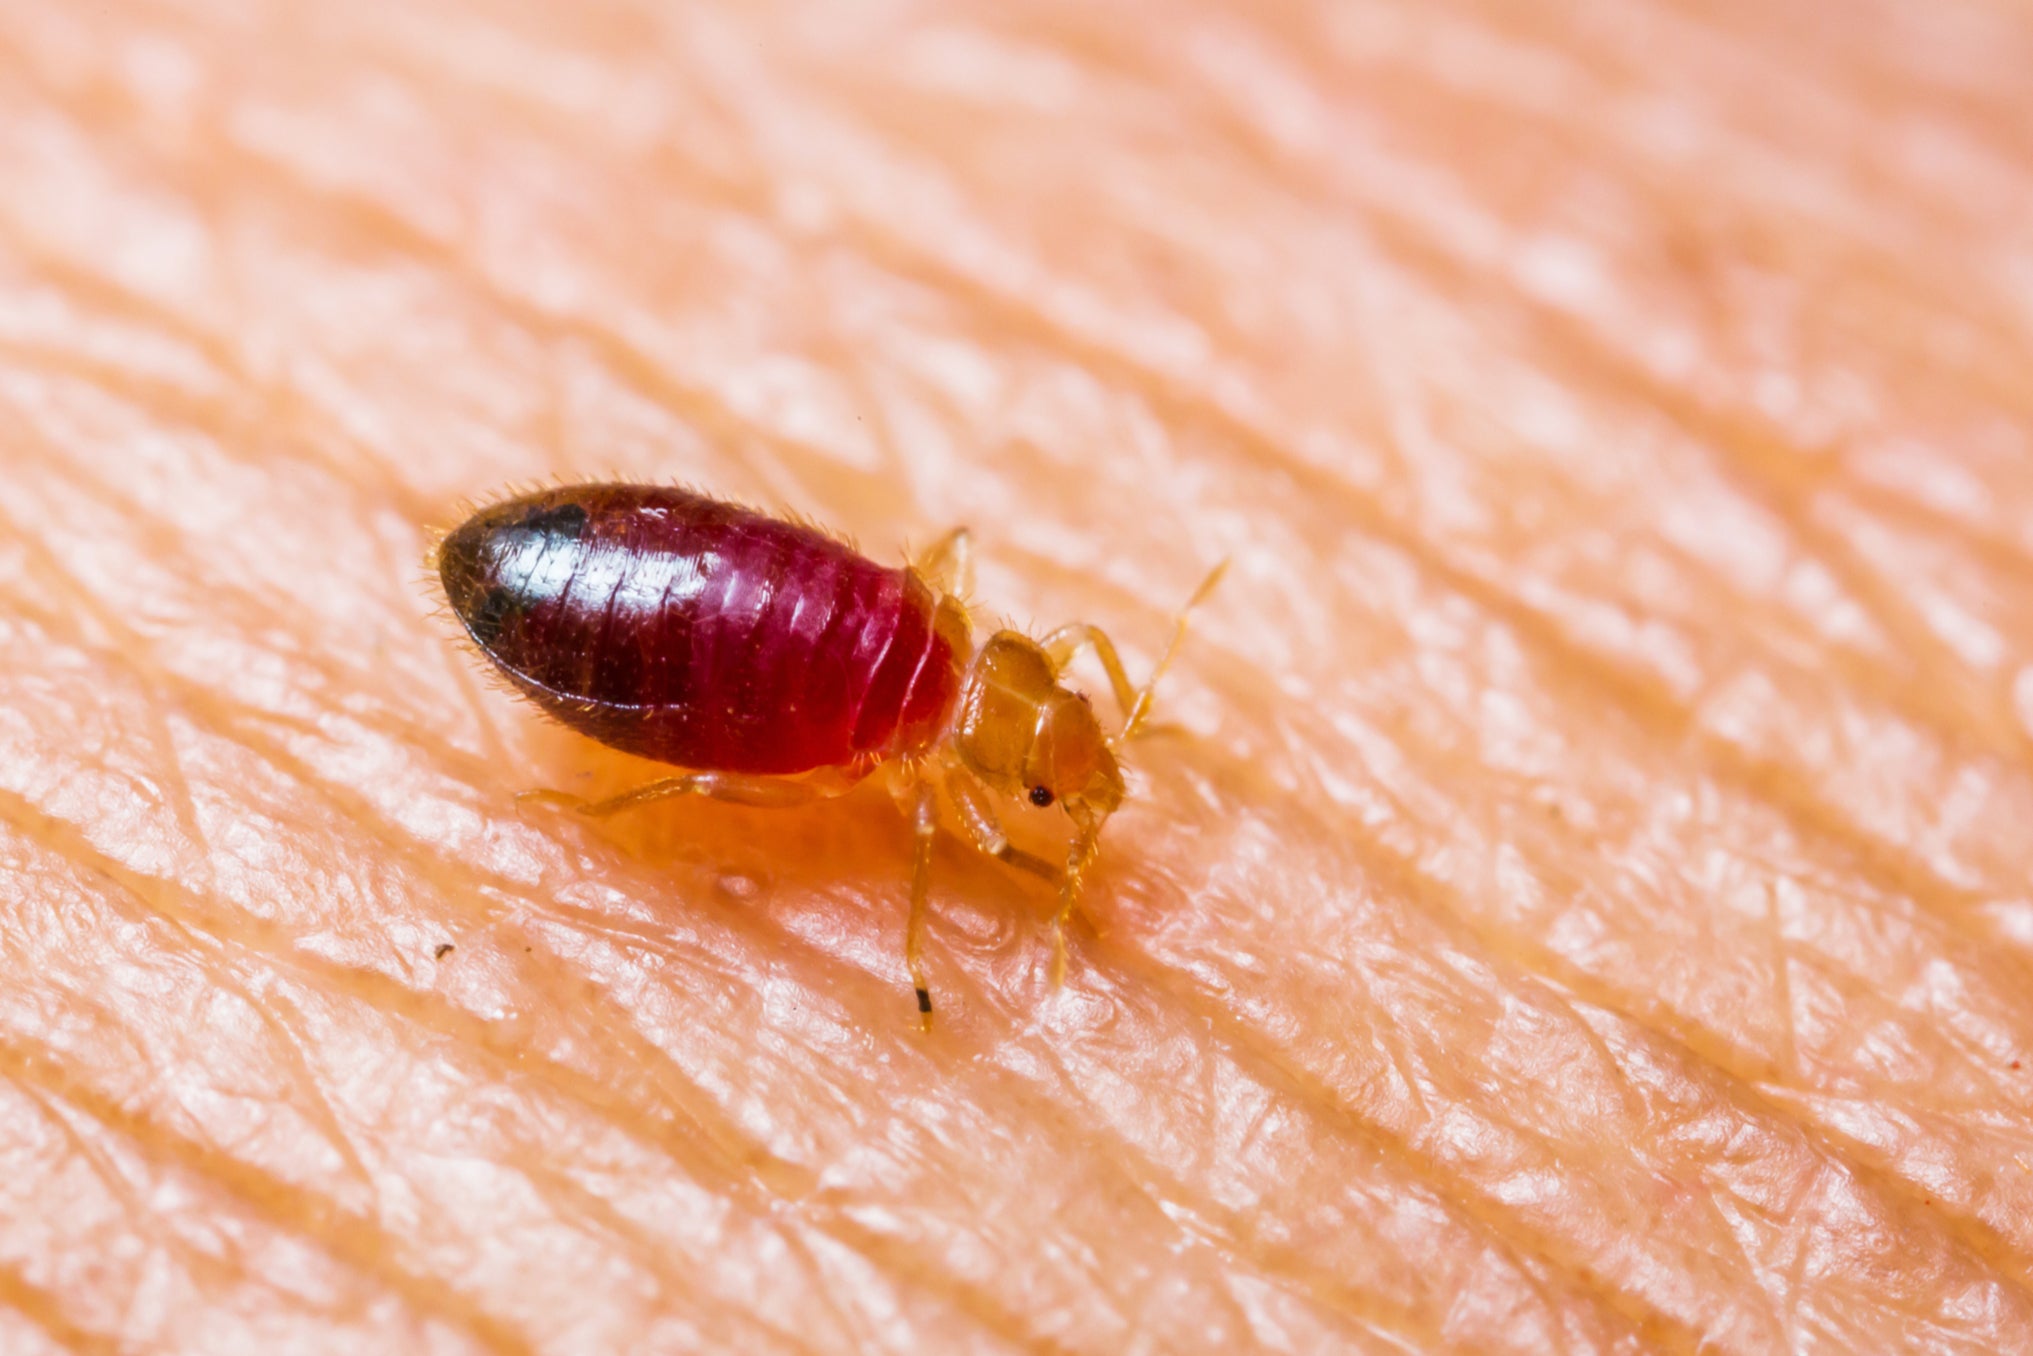 Bedbugs have hit the headlines recently after an outbreak of cases in Paris